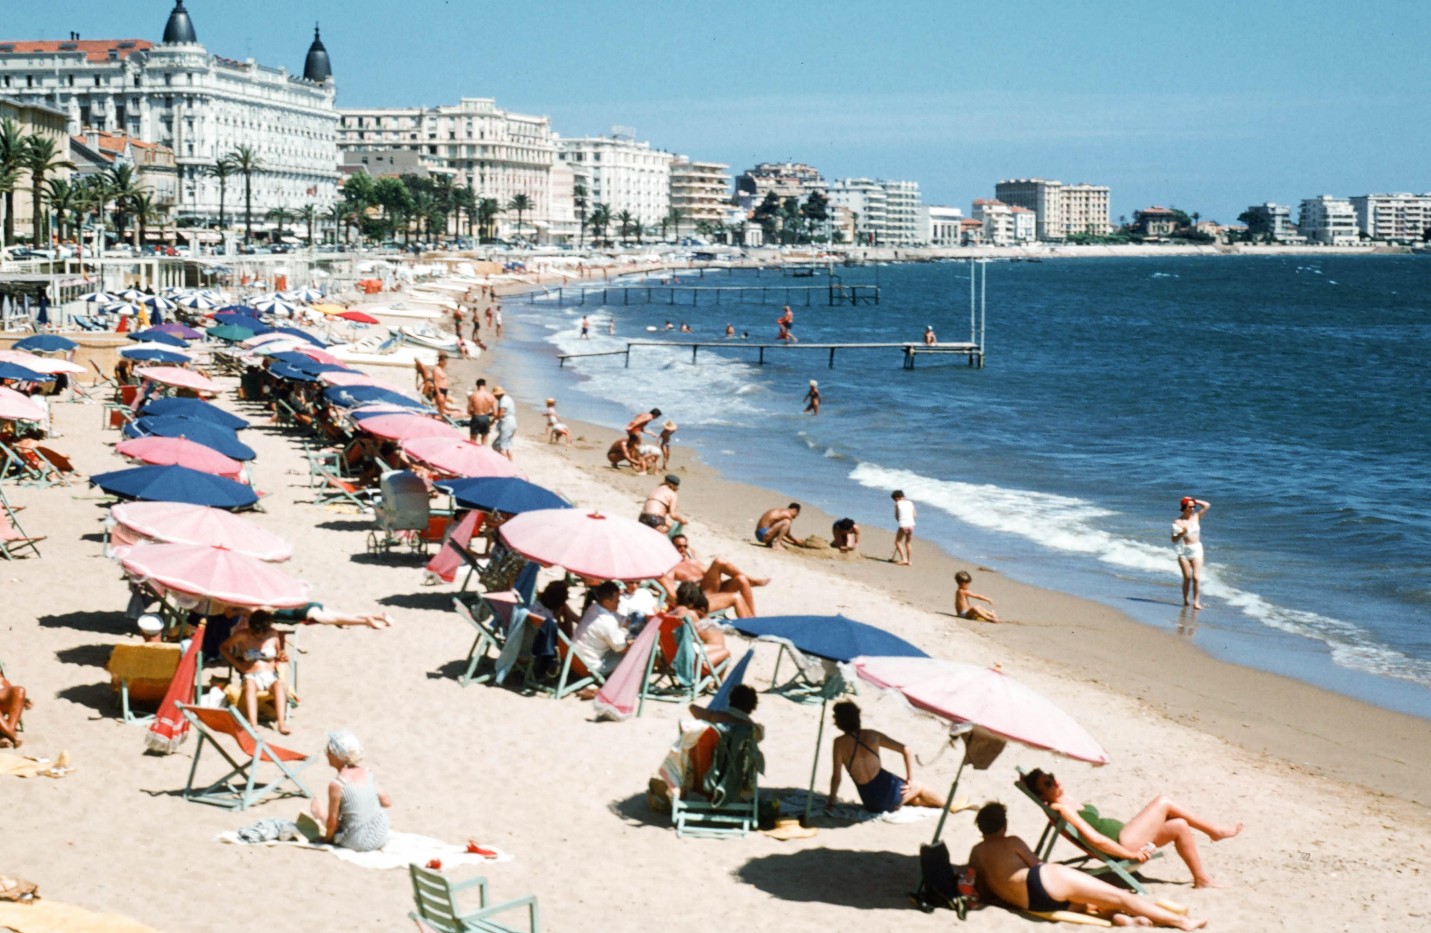 1950s vintage French Riviera beach photograph.